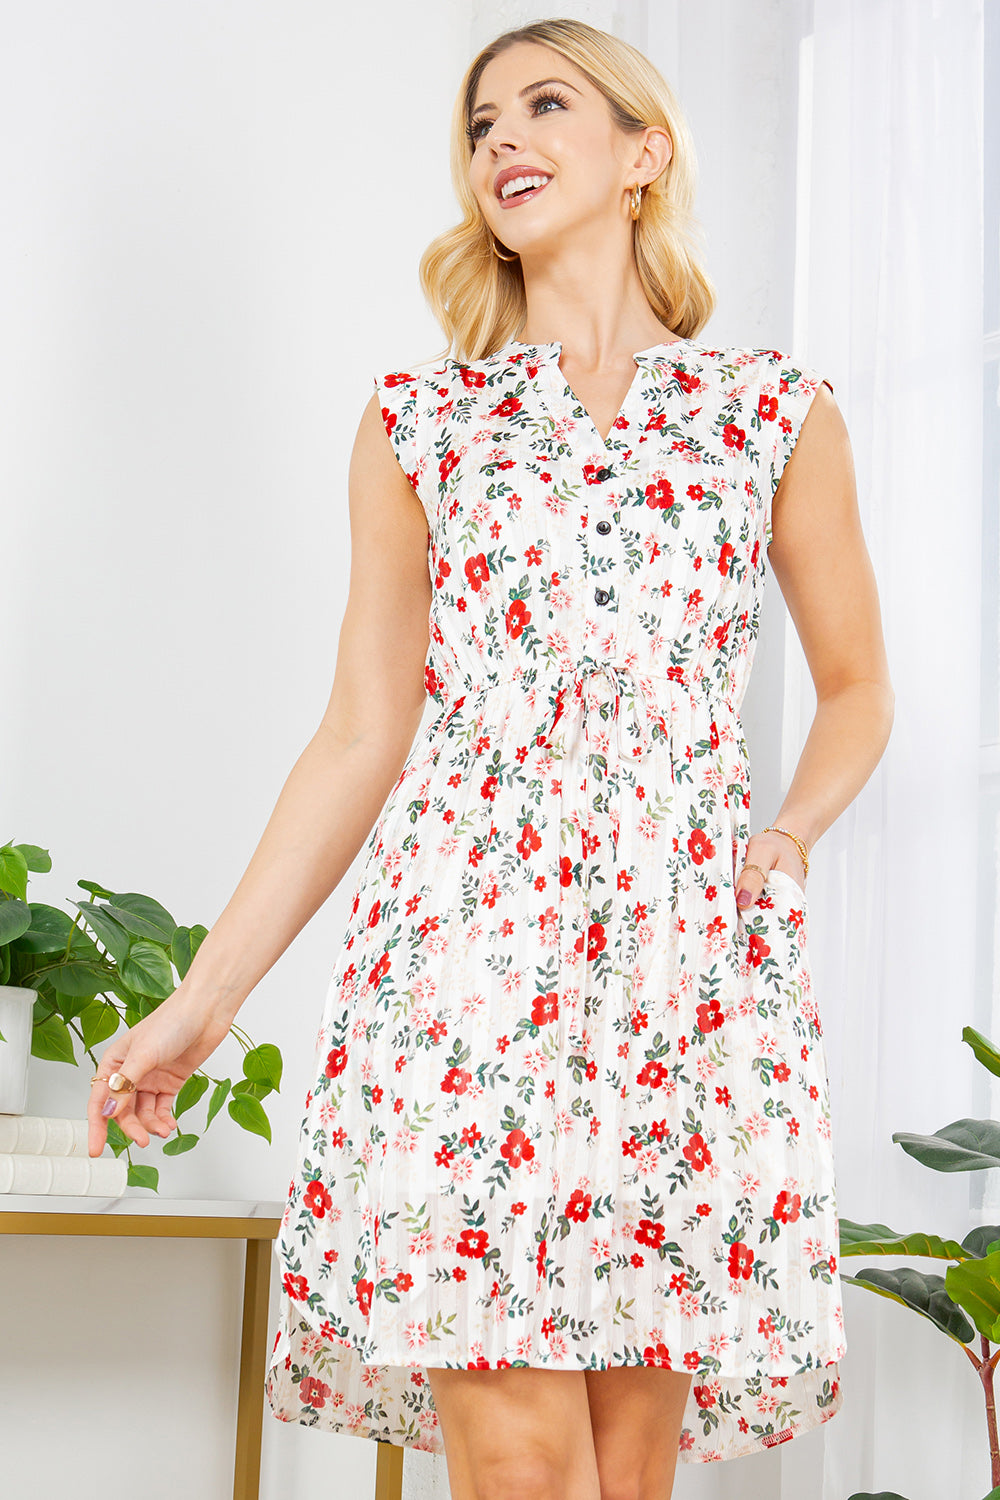 Floral With Sparkly Summer Dress